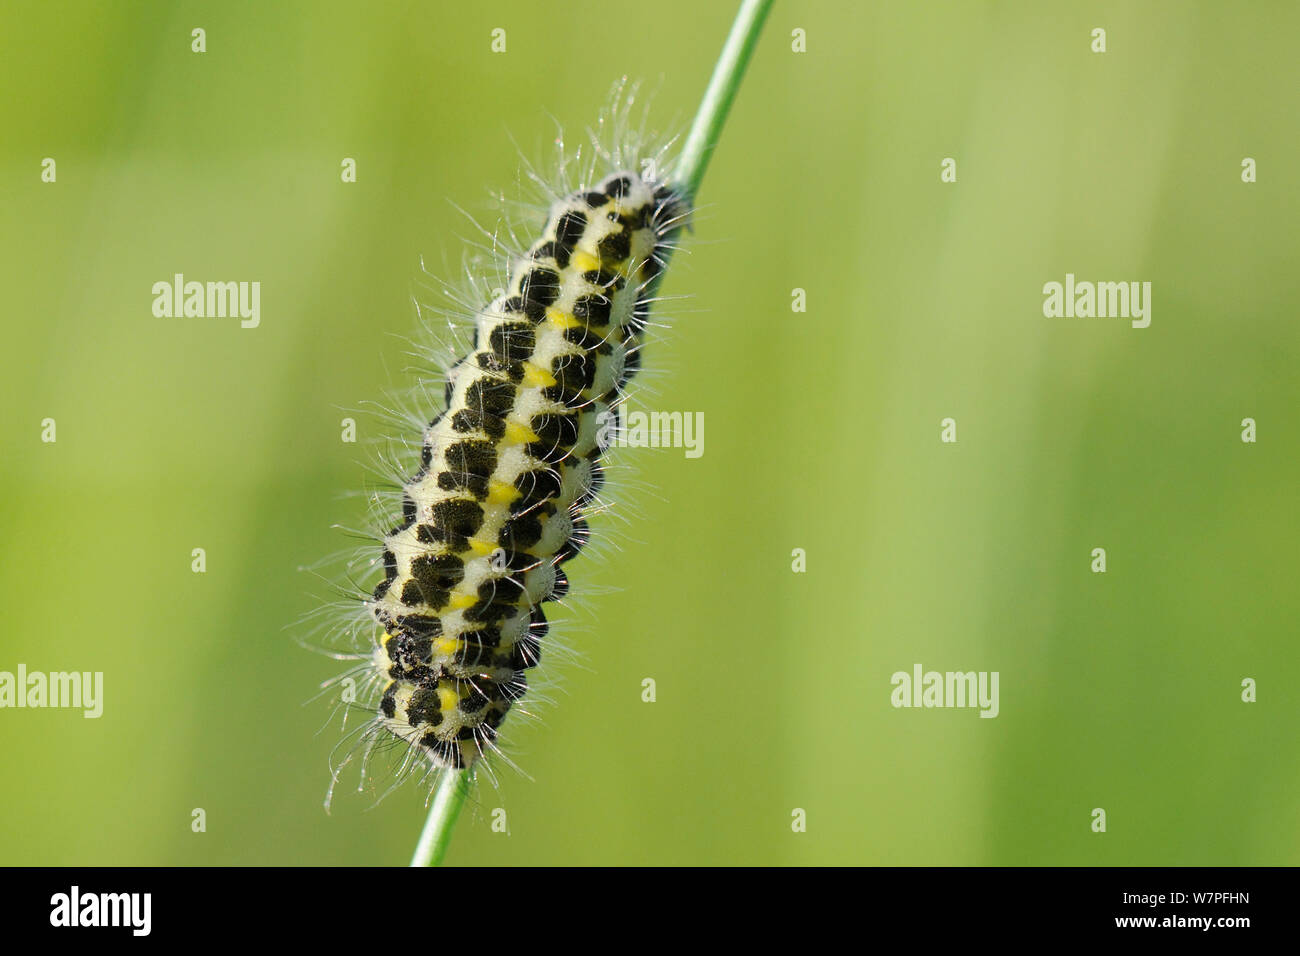 Larva of Narrow-bordered five-spot burnet moth (Zygaena lonicerae) with long black and white hairs preparing to pupate on a grass stem in a chalk grassland meadow, Wiltshire, UK, May. Stock Photo